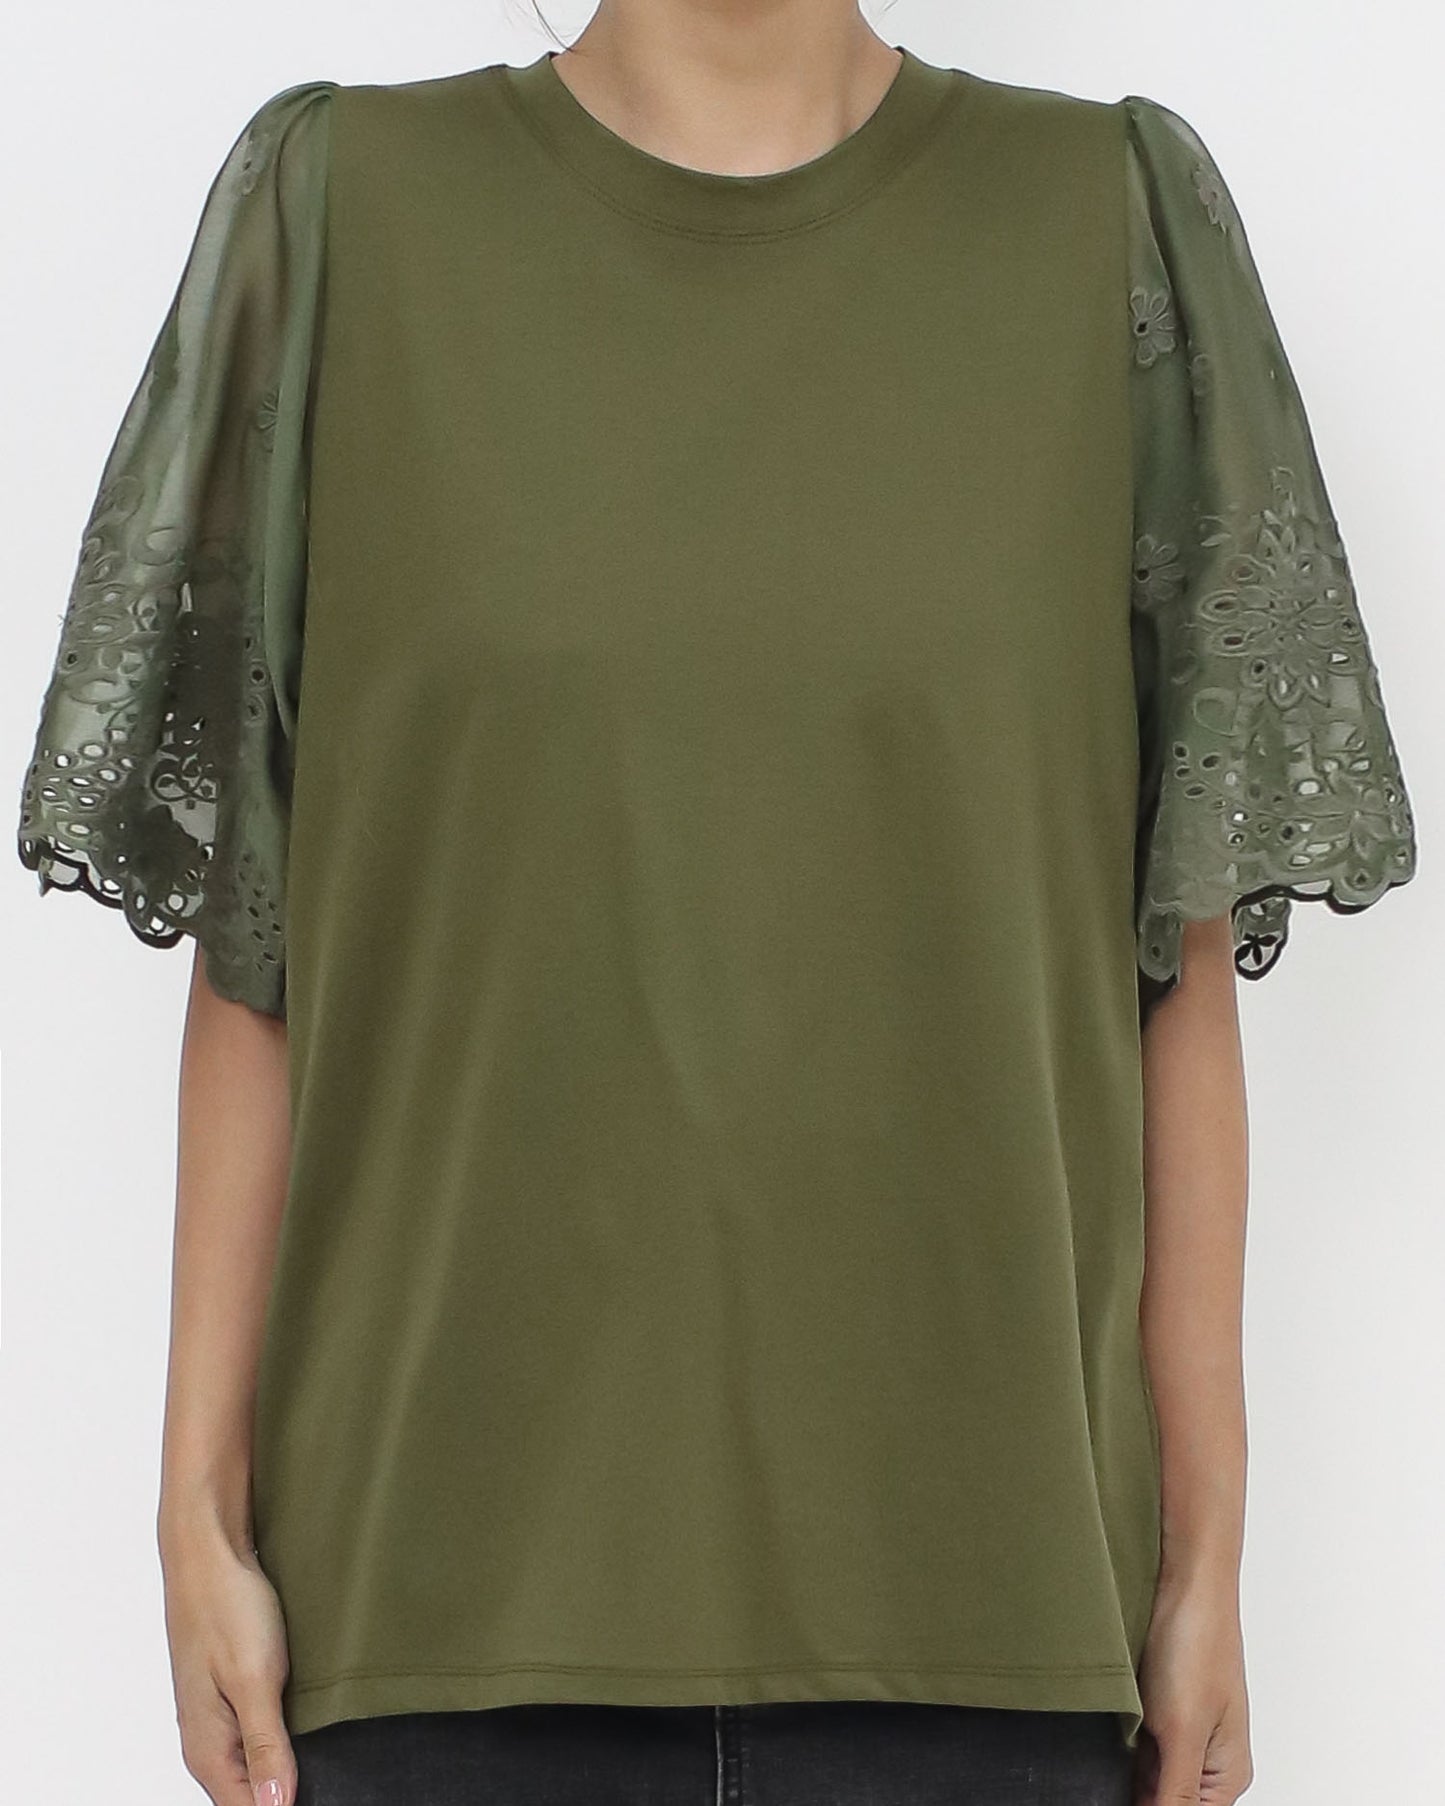 green w/ lace mesh sleeves tee